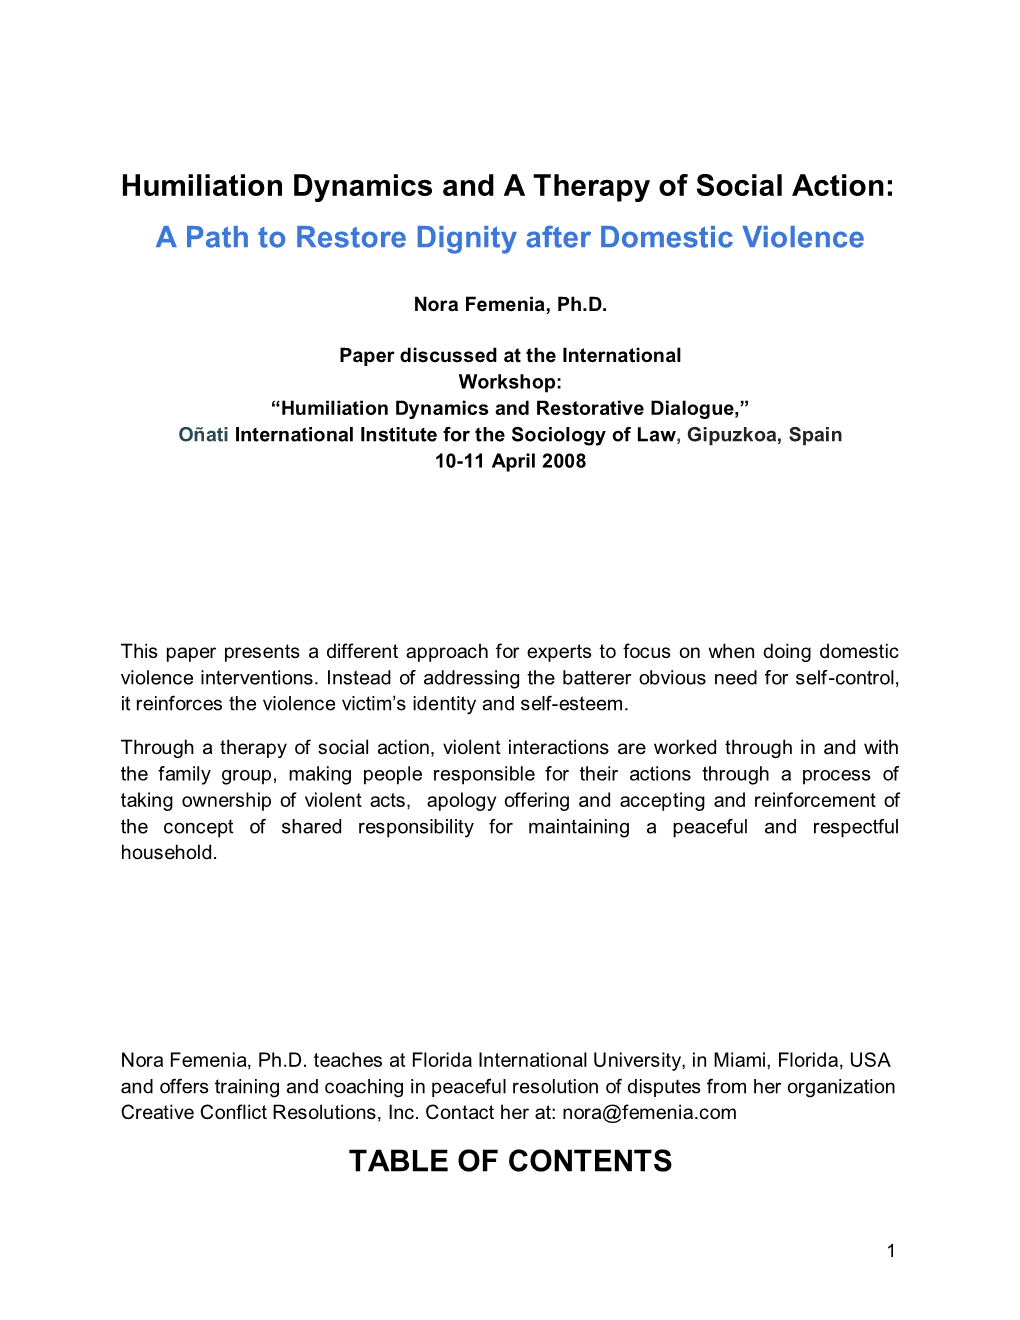 Humiliation Dynamics and a Therapy of Social Action: a Path to Restore